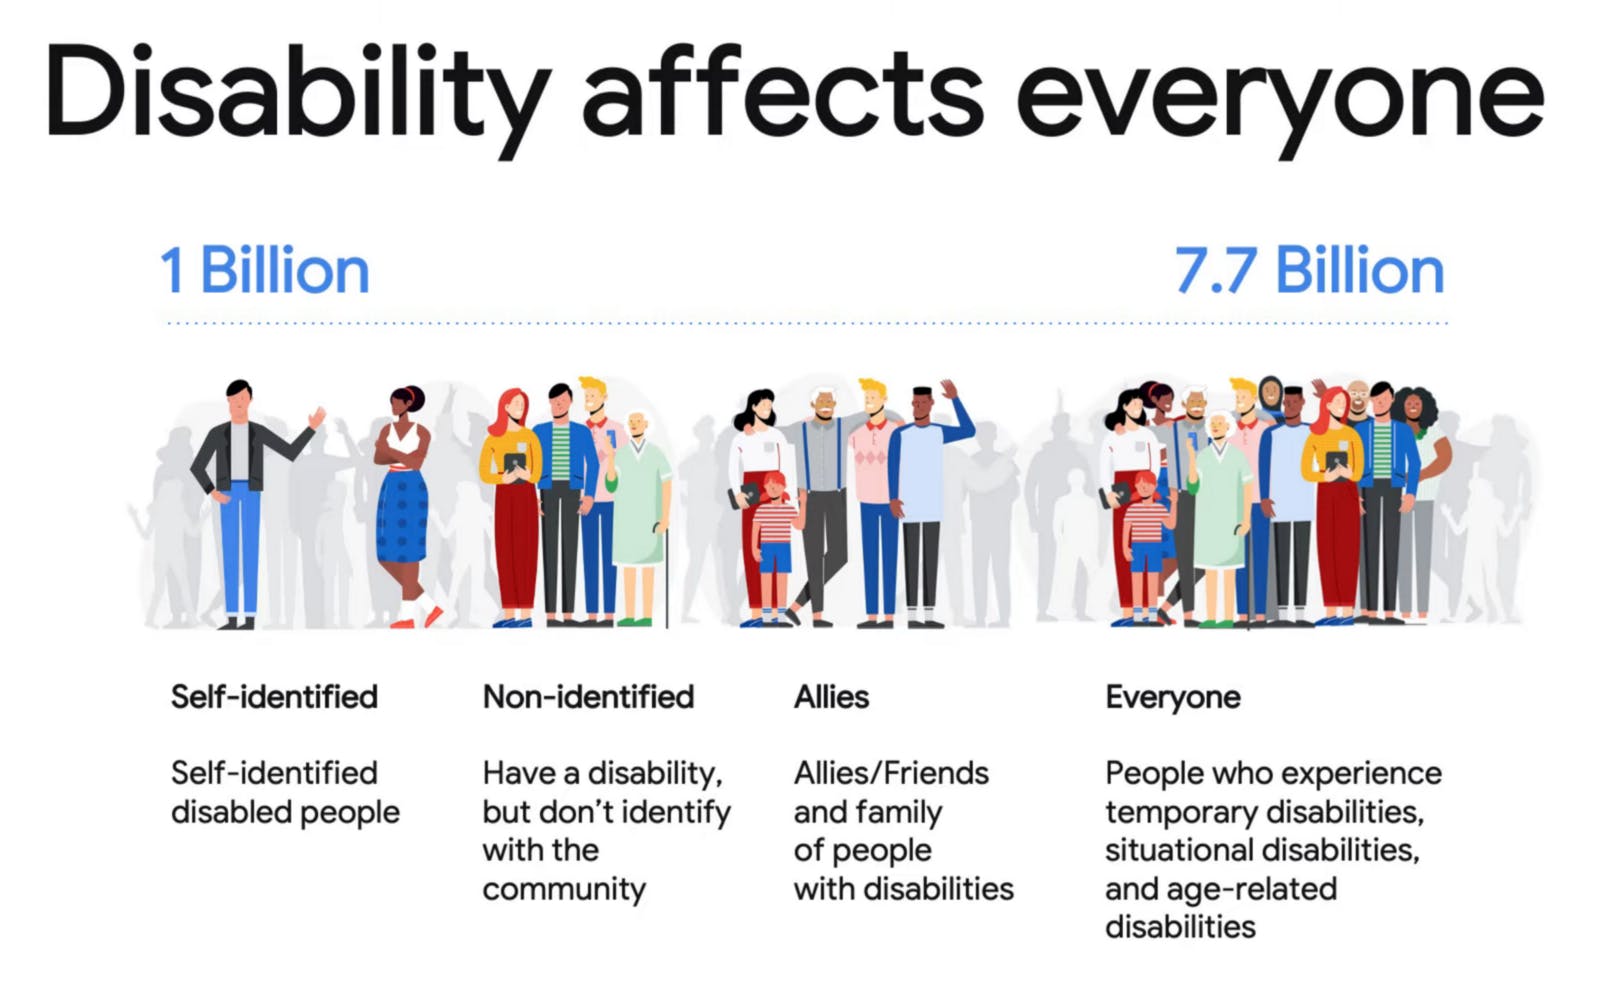 An image showing the illustration of how many people are disabled in the world.